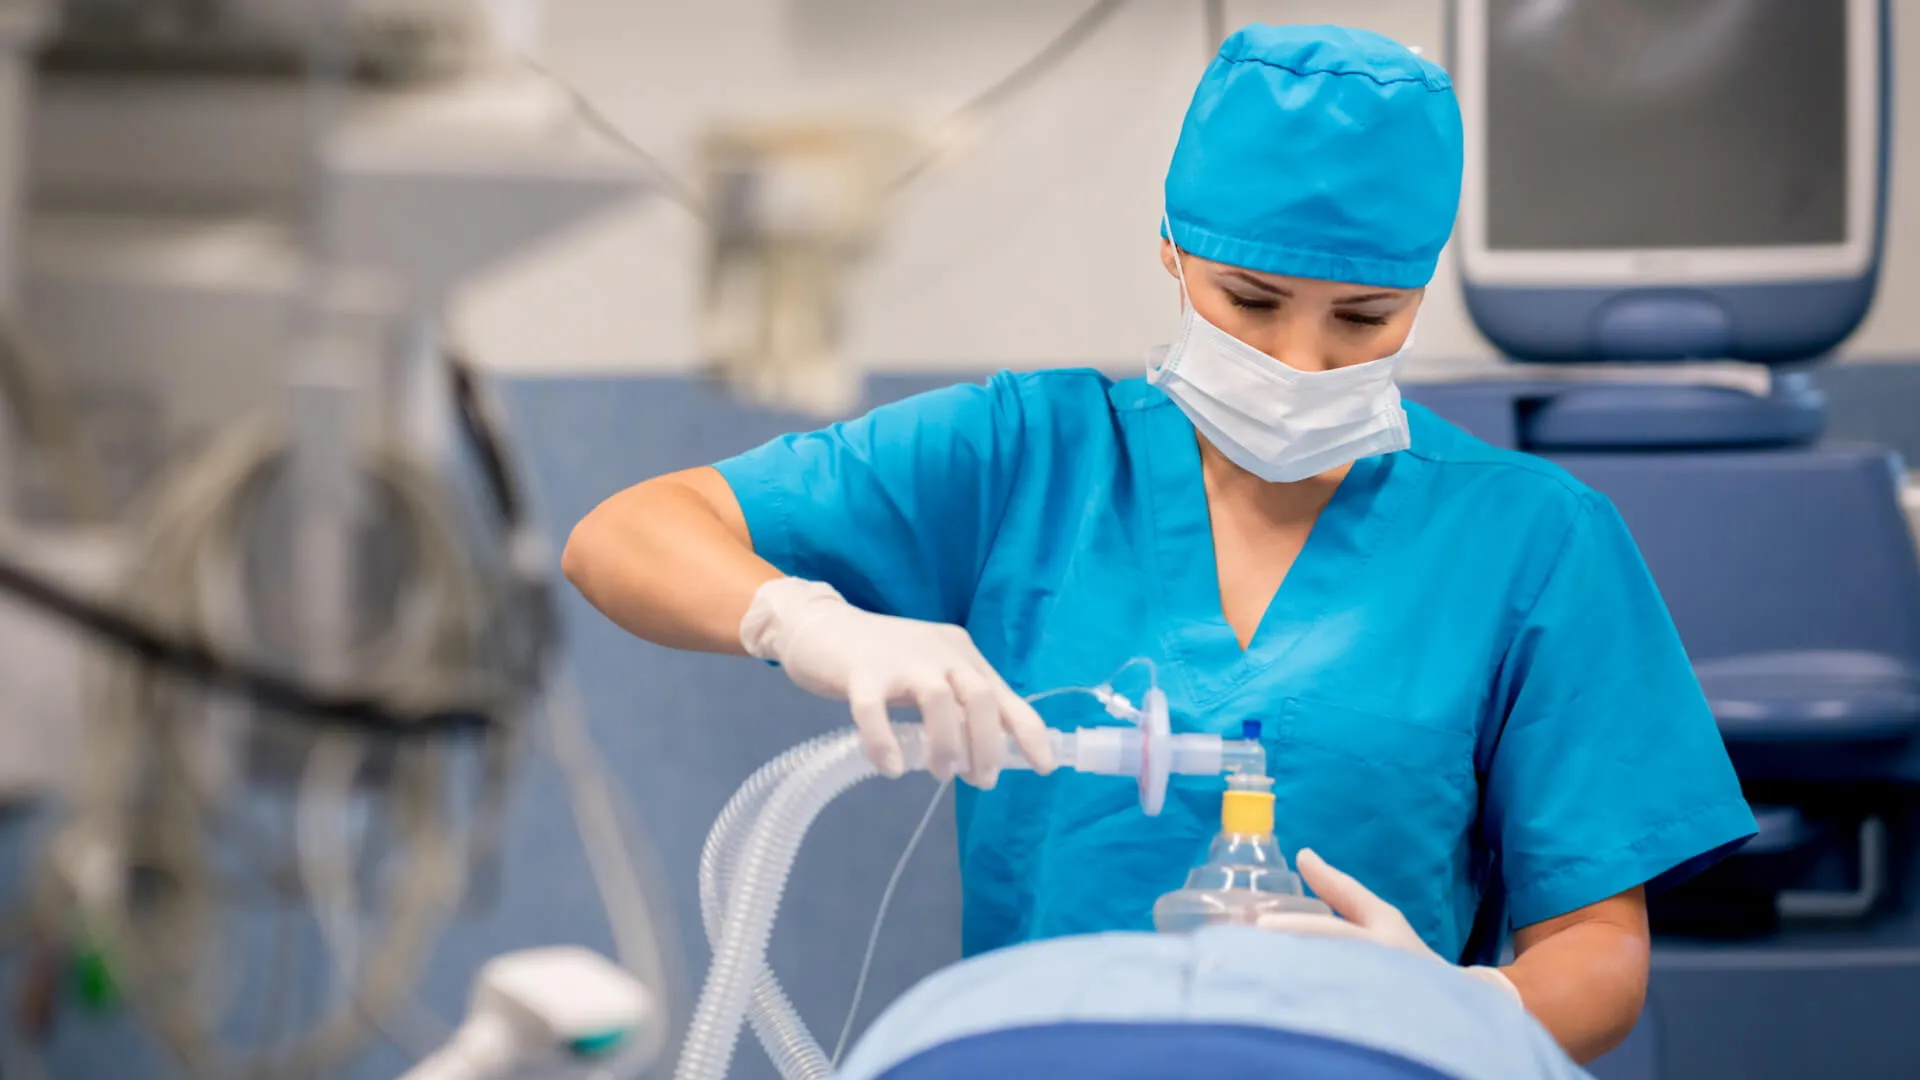 Nurse anesthetist putting oxygen mask to patient during surgery